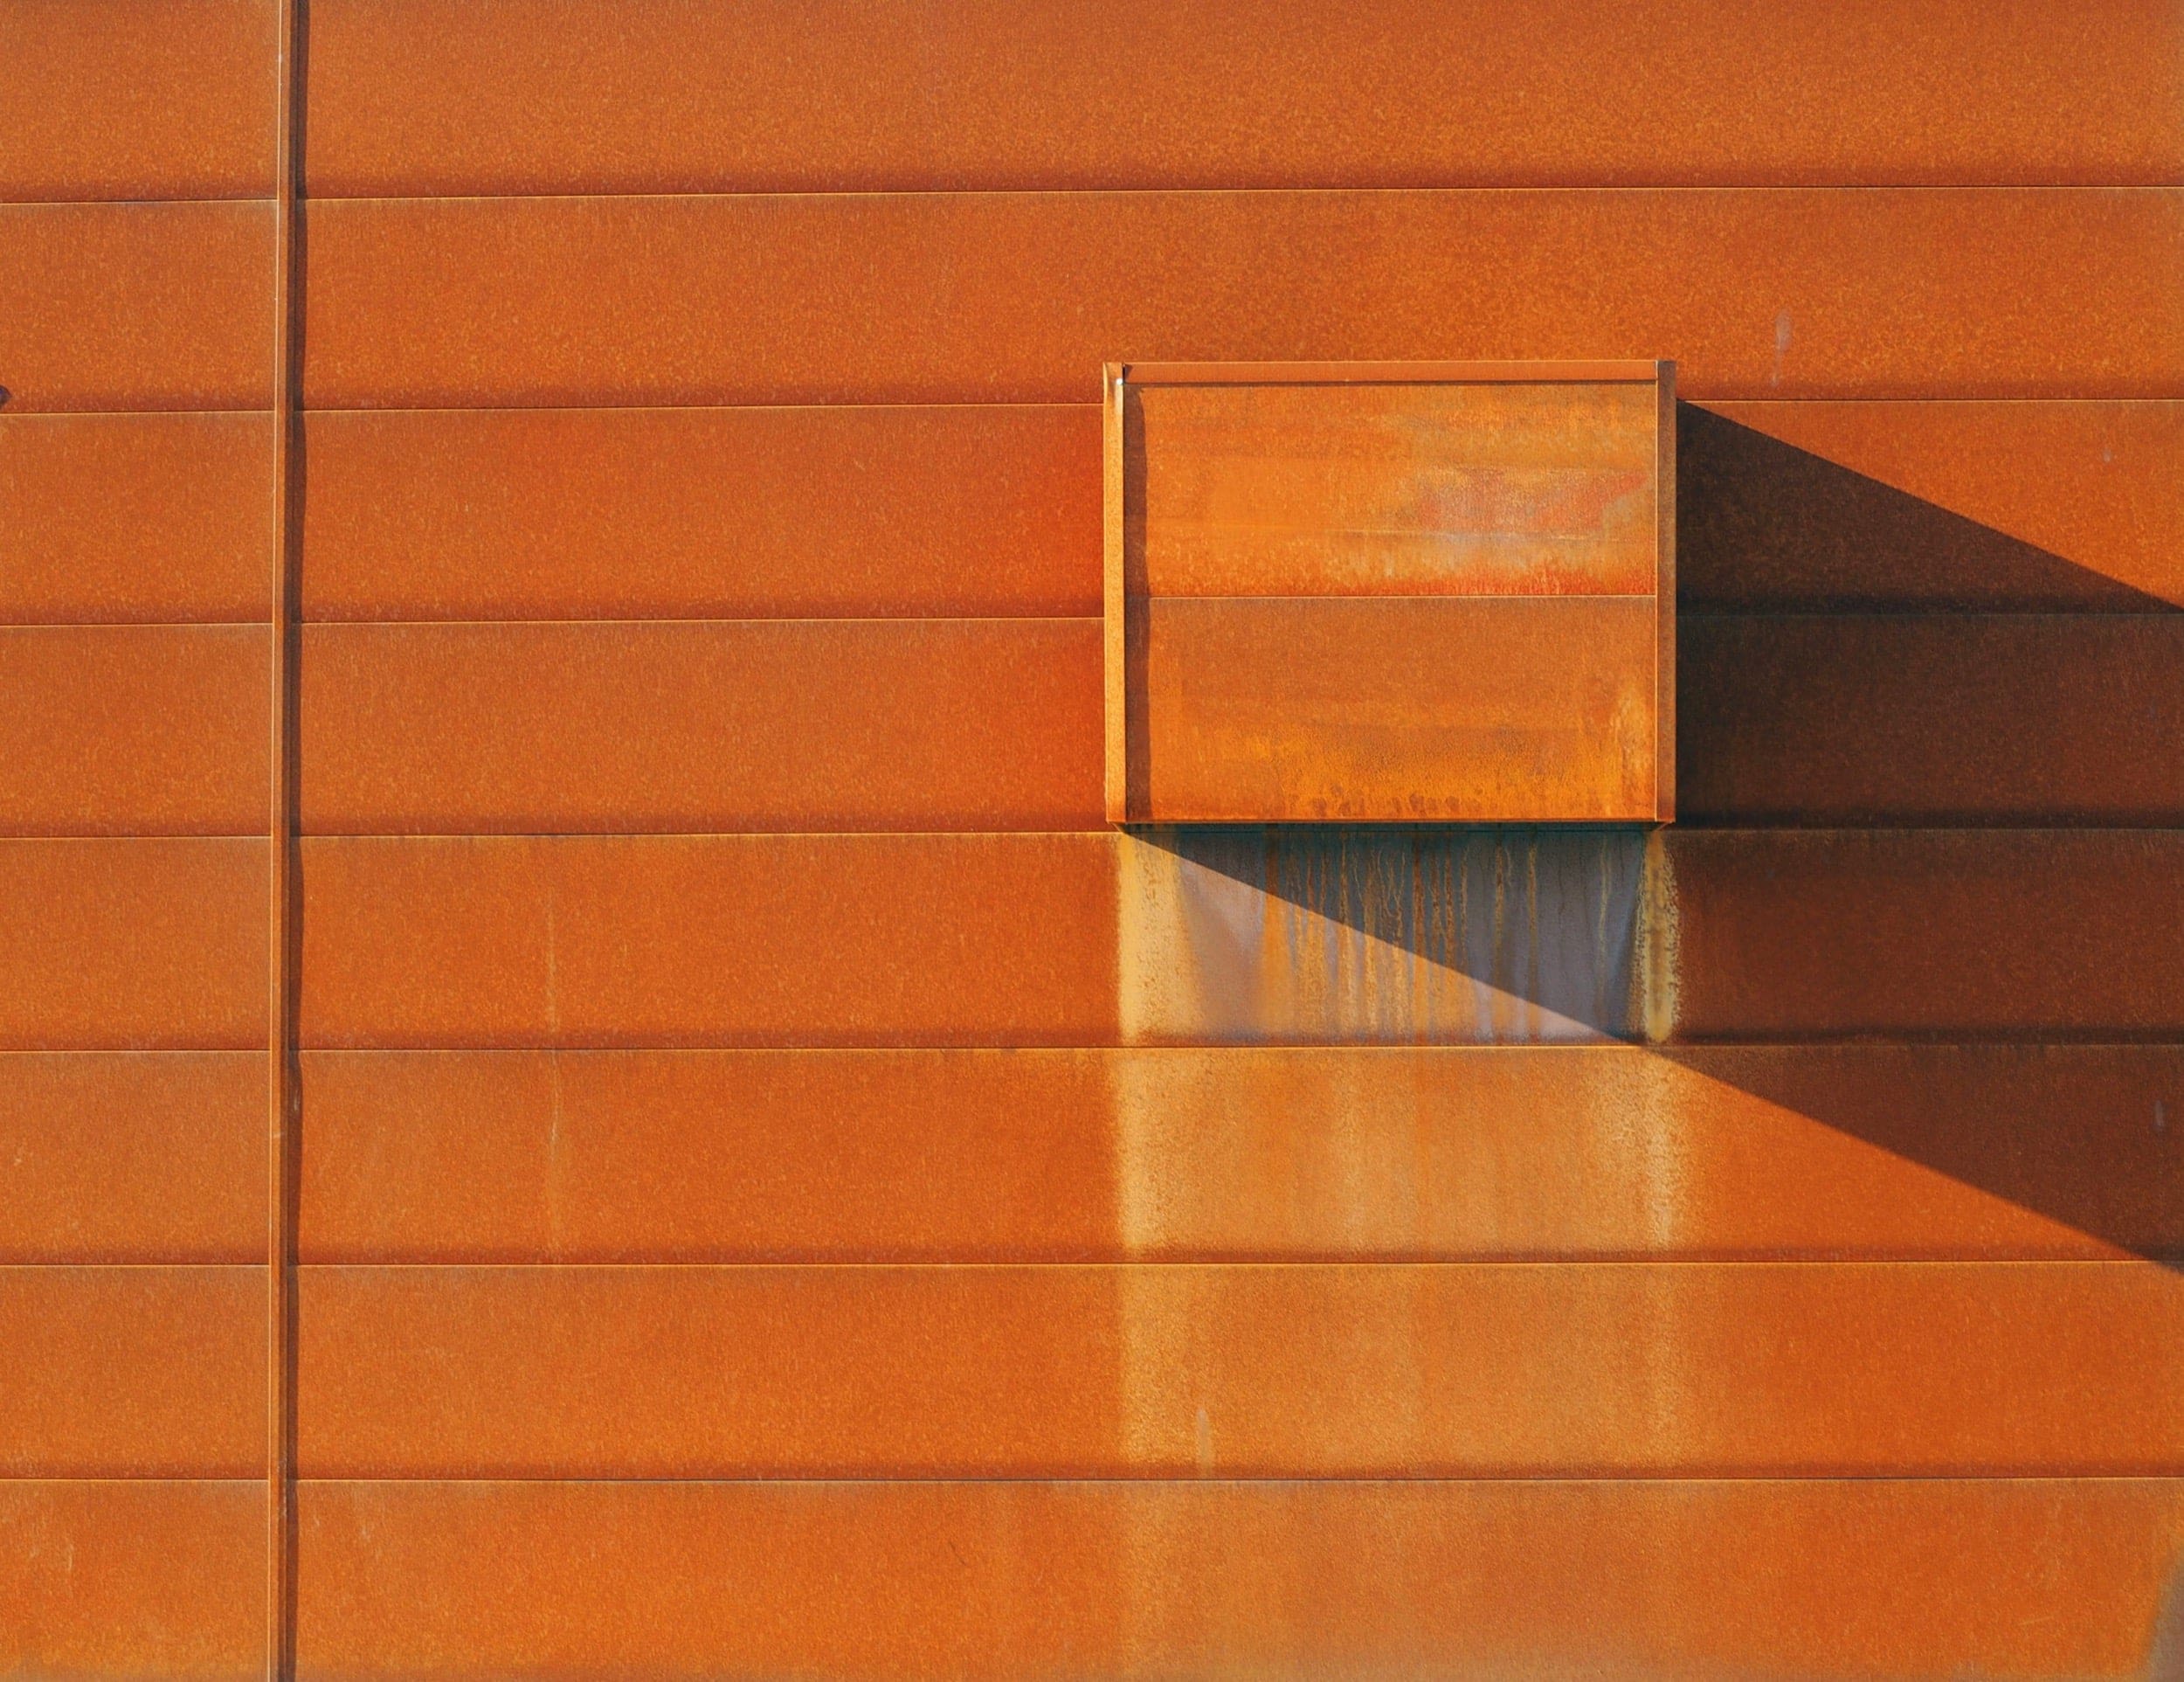 Facade penetrations and other elements can negatively impact weathering patterns on Corten steel.